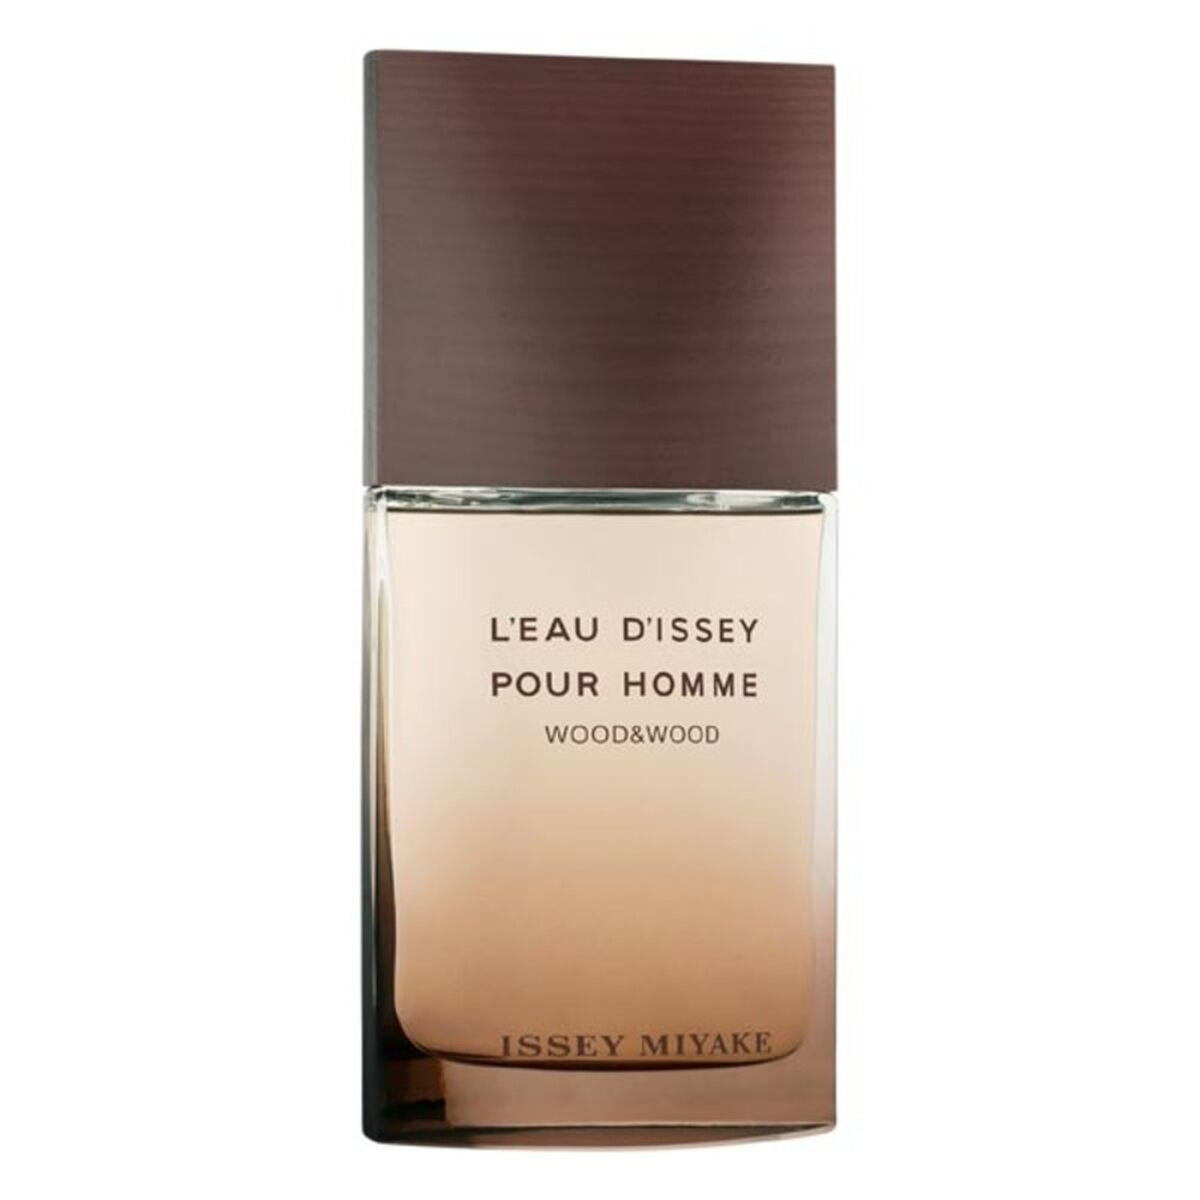 Kaufe L'Eau D'Issey Pour Homme Wood & Wood Issey Miyake EDP - Herren bei AWK Flagship um € 59.00